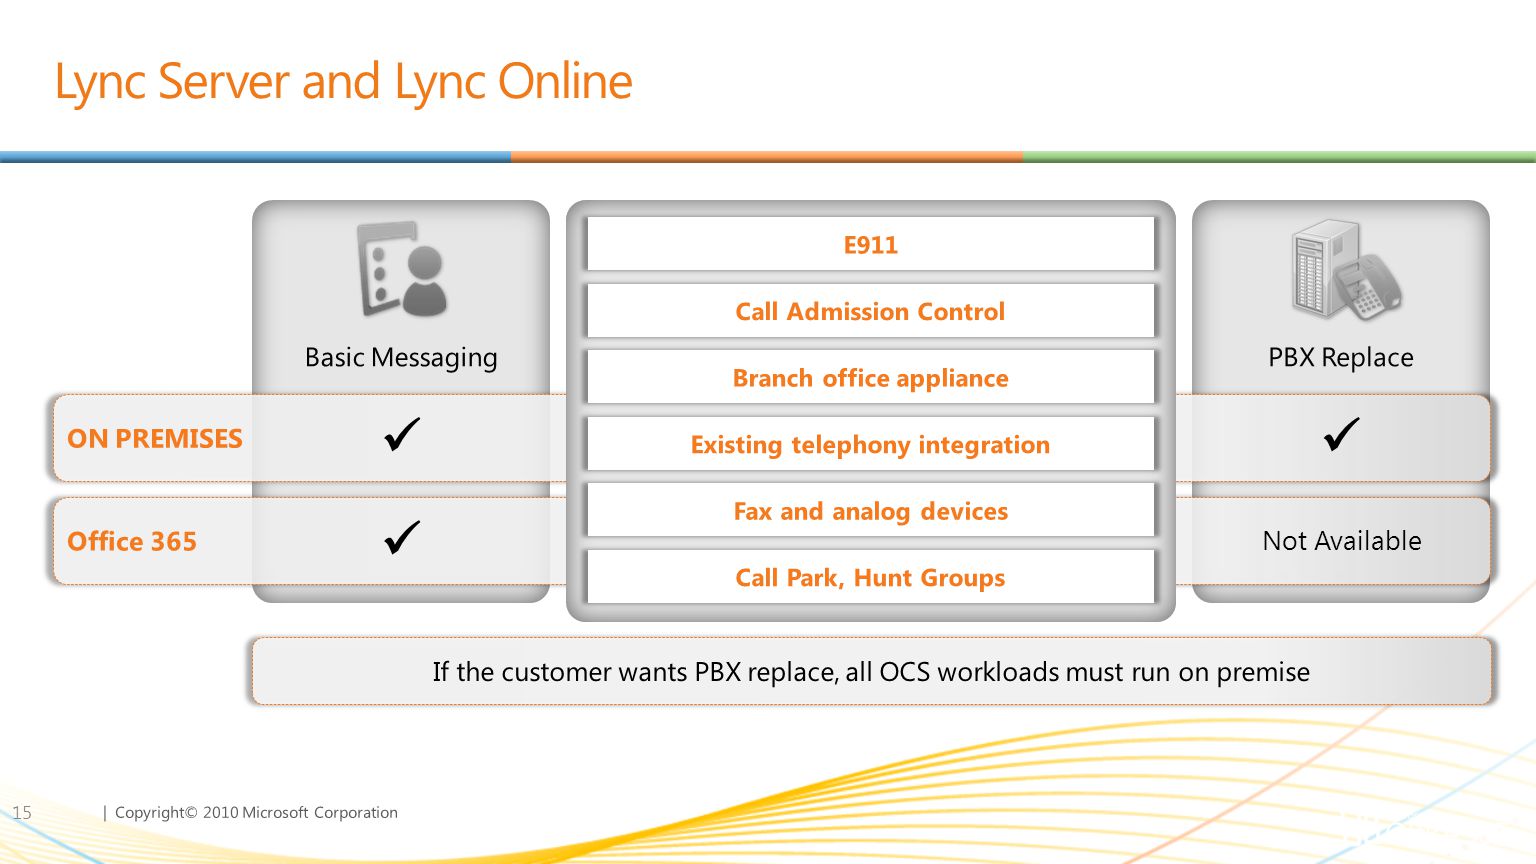 | Copyright© 2010 Microsoft Corporation Lync Server and Lync Online 15 Basic Messaging ConferencingVoice PBX Replace Not AvailableFY12